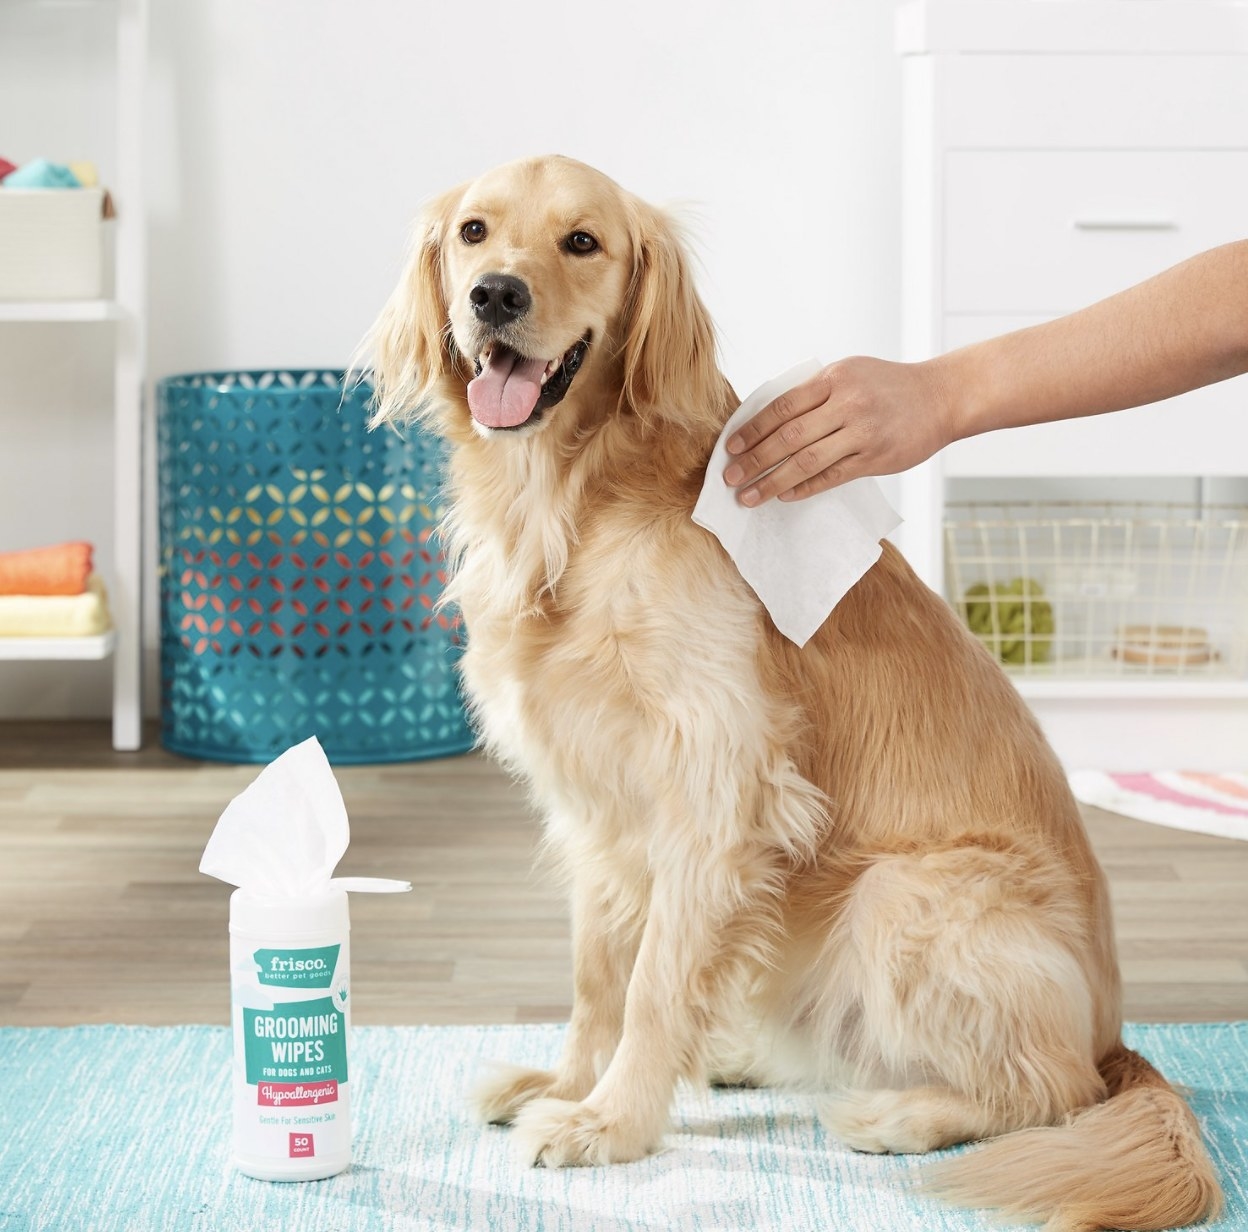 There is a long-haired golden retriever being wiped down with a white wipe from a bottle nearby that says &quot;GROOMING WIPES&quot;